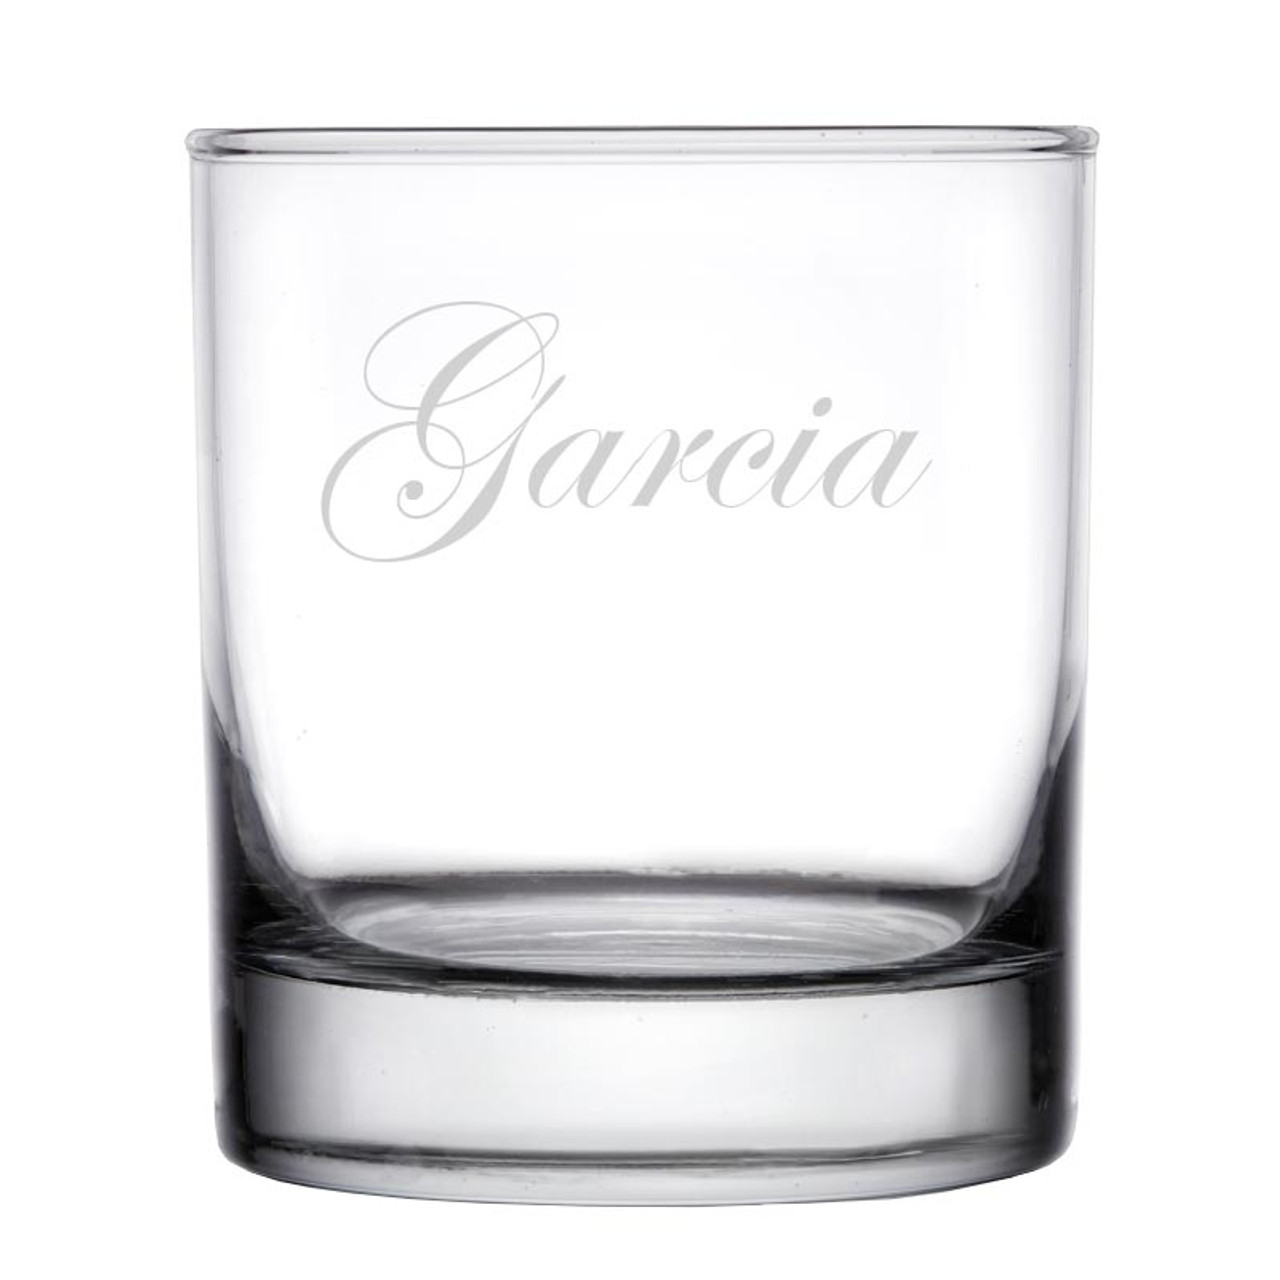 https://cdn11.bigcommerce.com/s-d22a0/images/stencil/1280x1280/products/2514/11858/personalized-rocks-whiskey-glasses-name-script-edwardian-GLS704_rocks__92257.1627563514.jpg?c=2